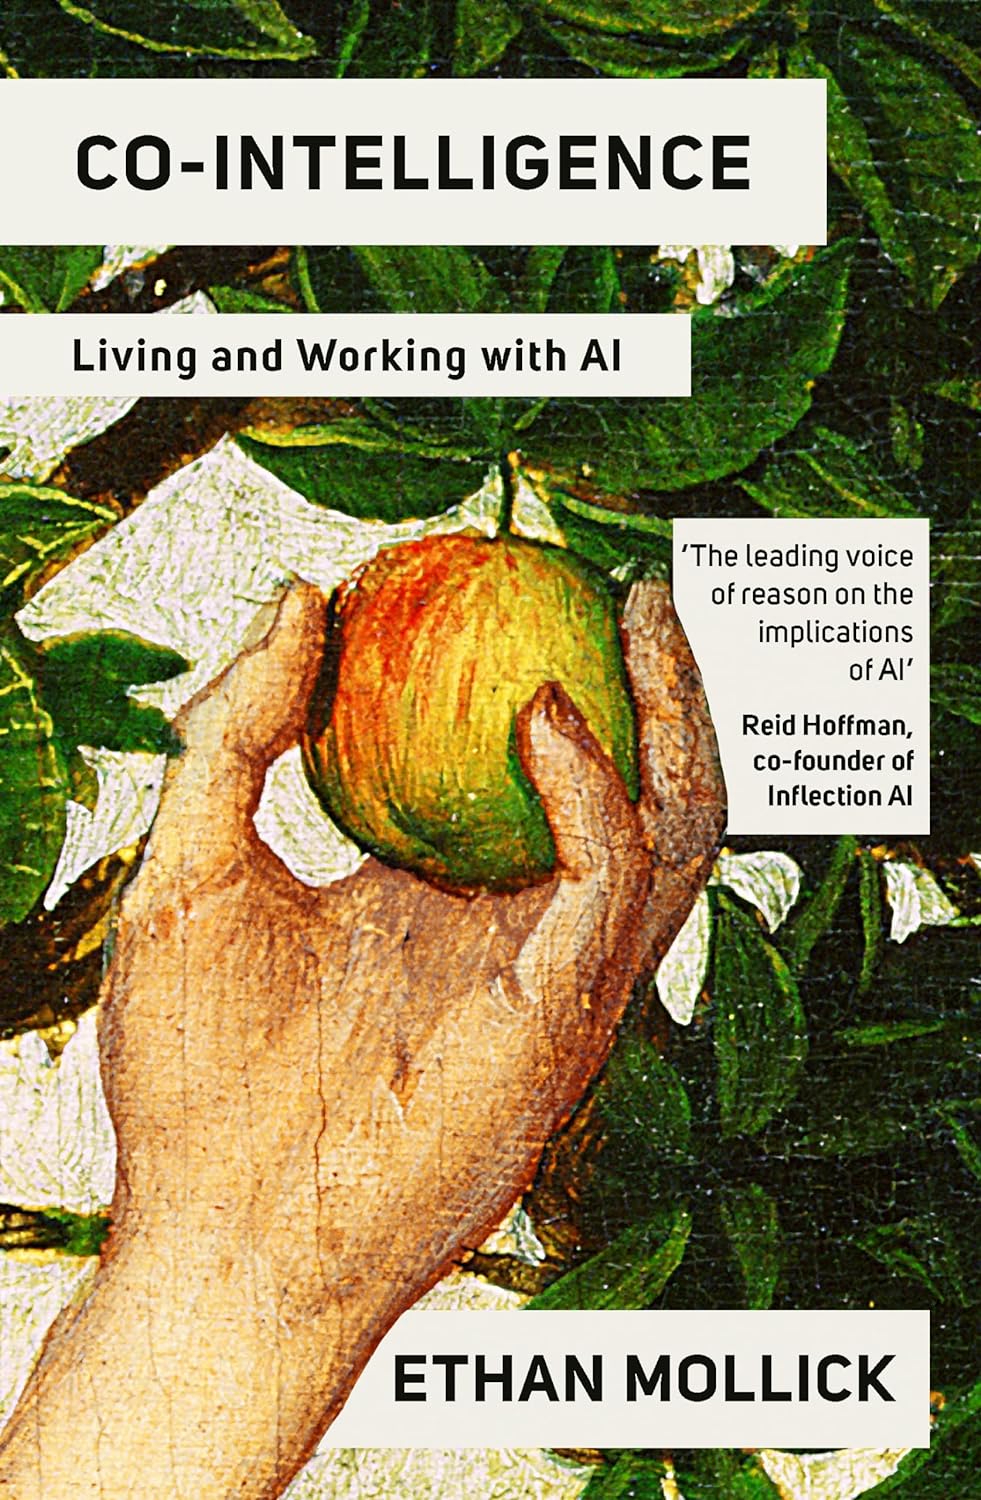 Co-Intelligence: Living and Working with AI